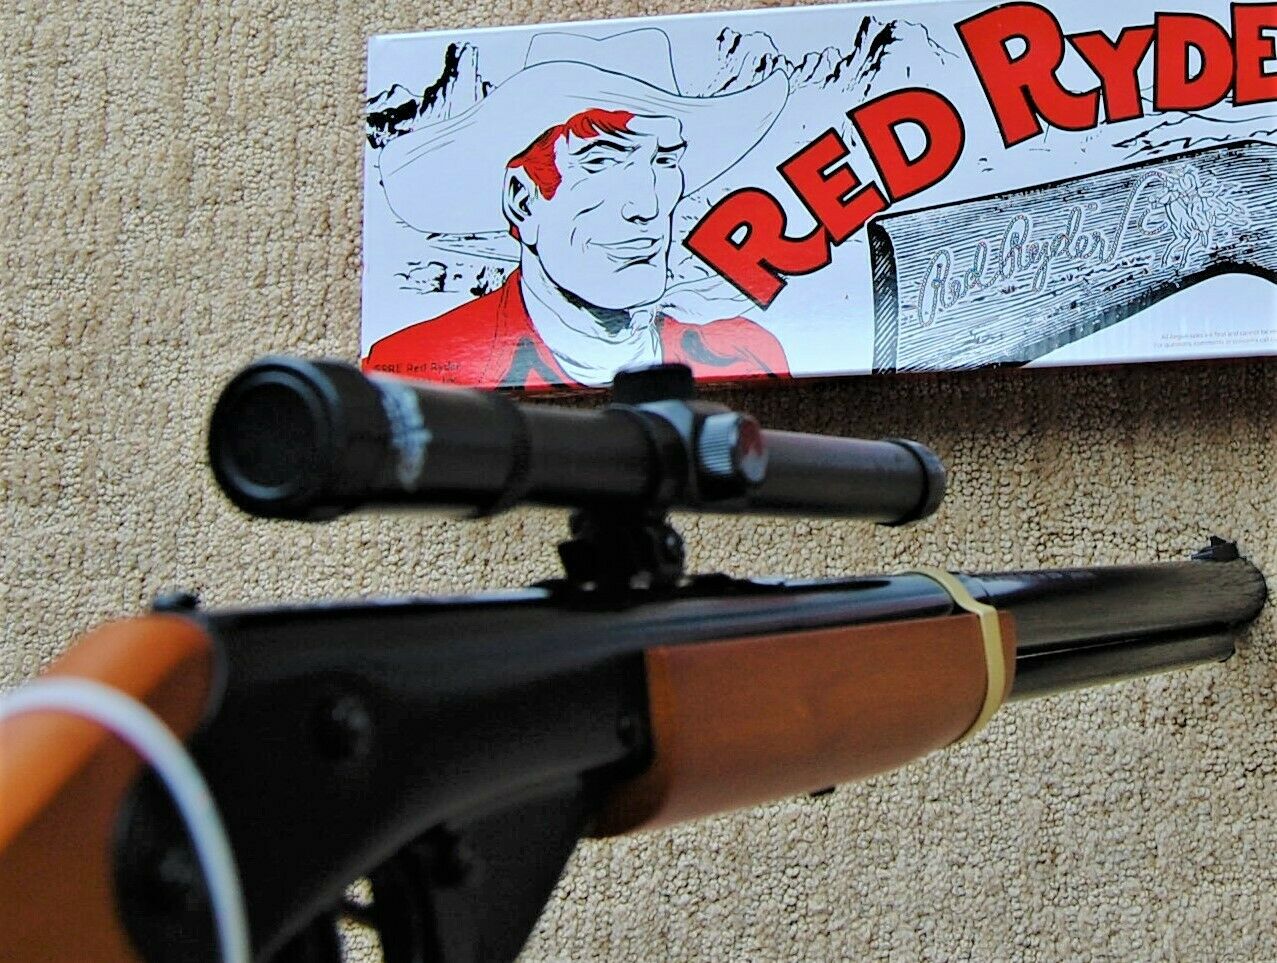 Daisy Red Ryder BB Gun With Scope, RR 80TH Anniv Bronze Medal,  BB'S & Targets.